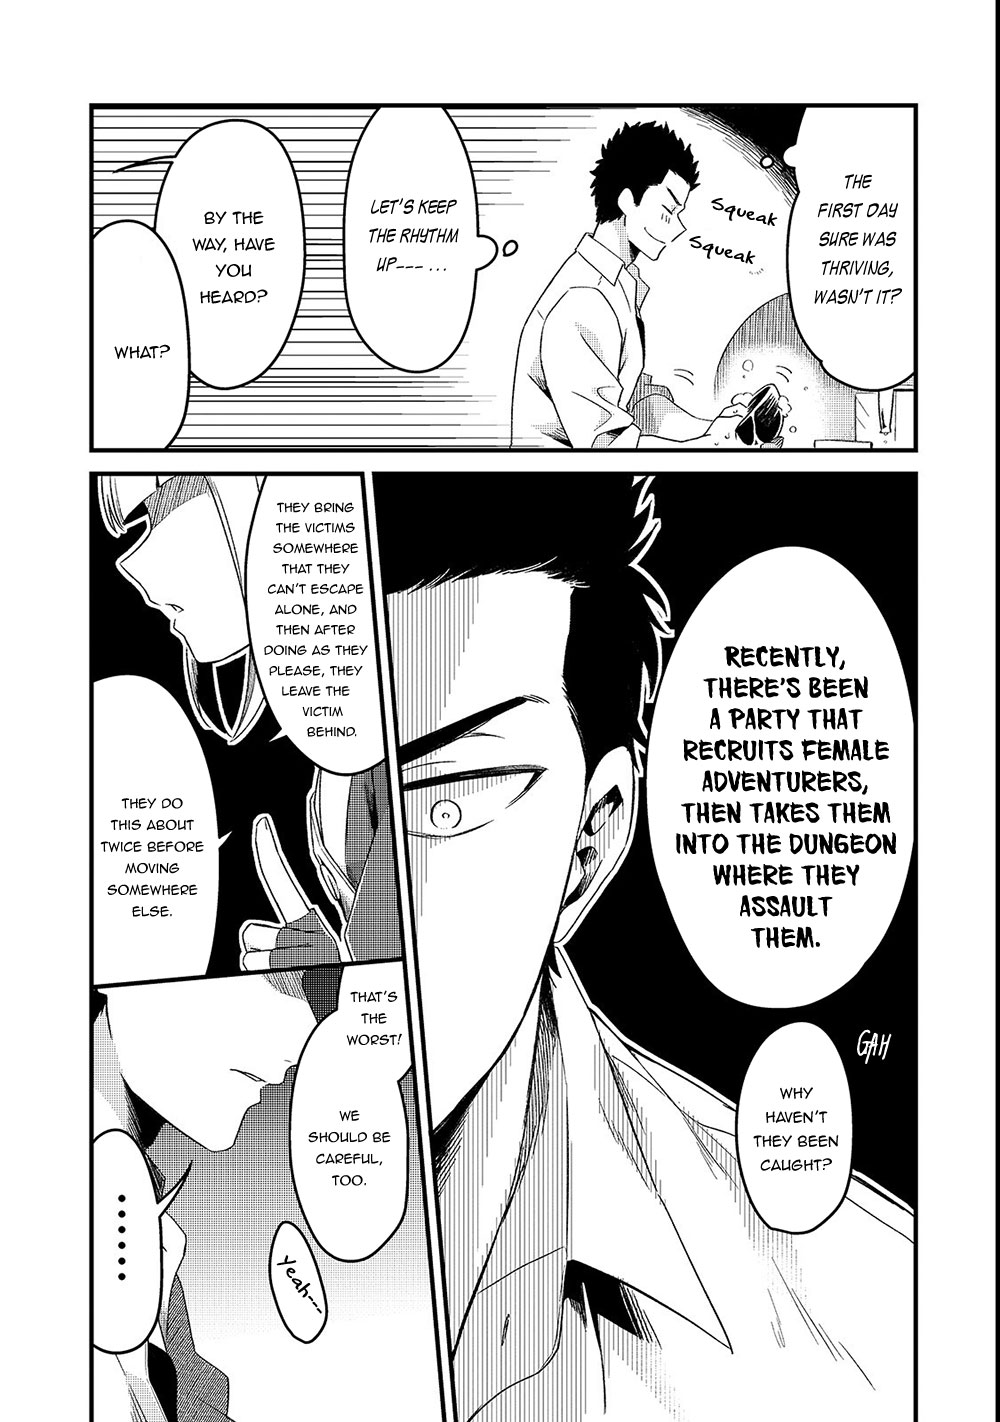 Welcome to Cheap Restaurant of Outcasts! Vol. 1 Ch. 2